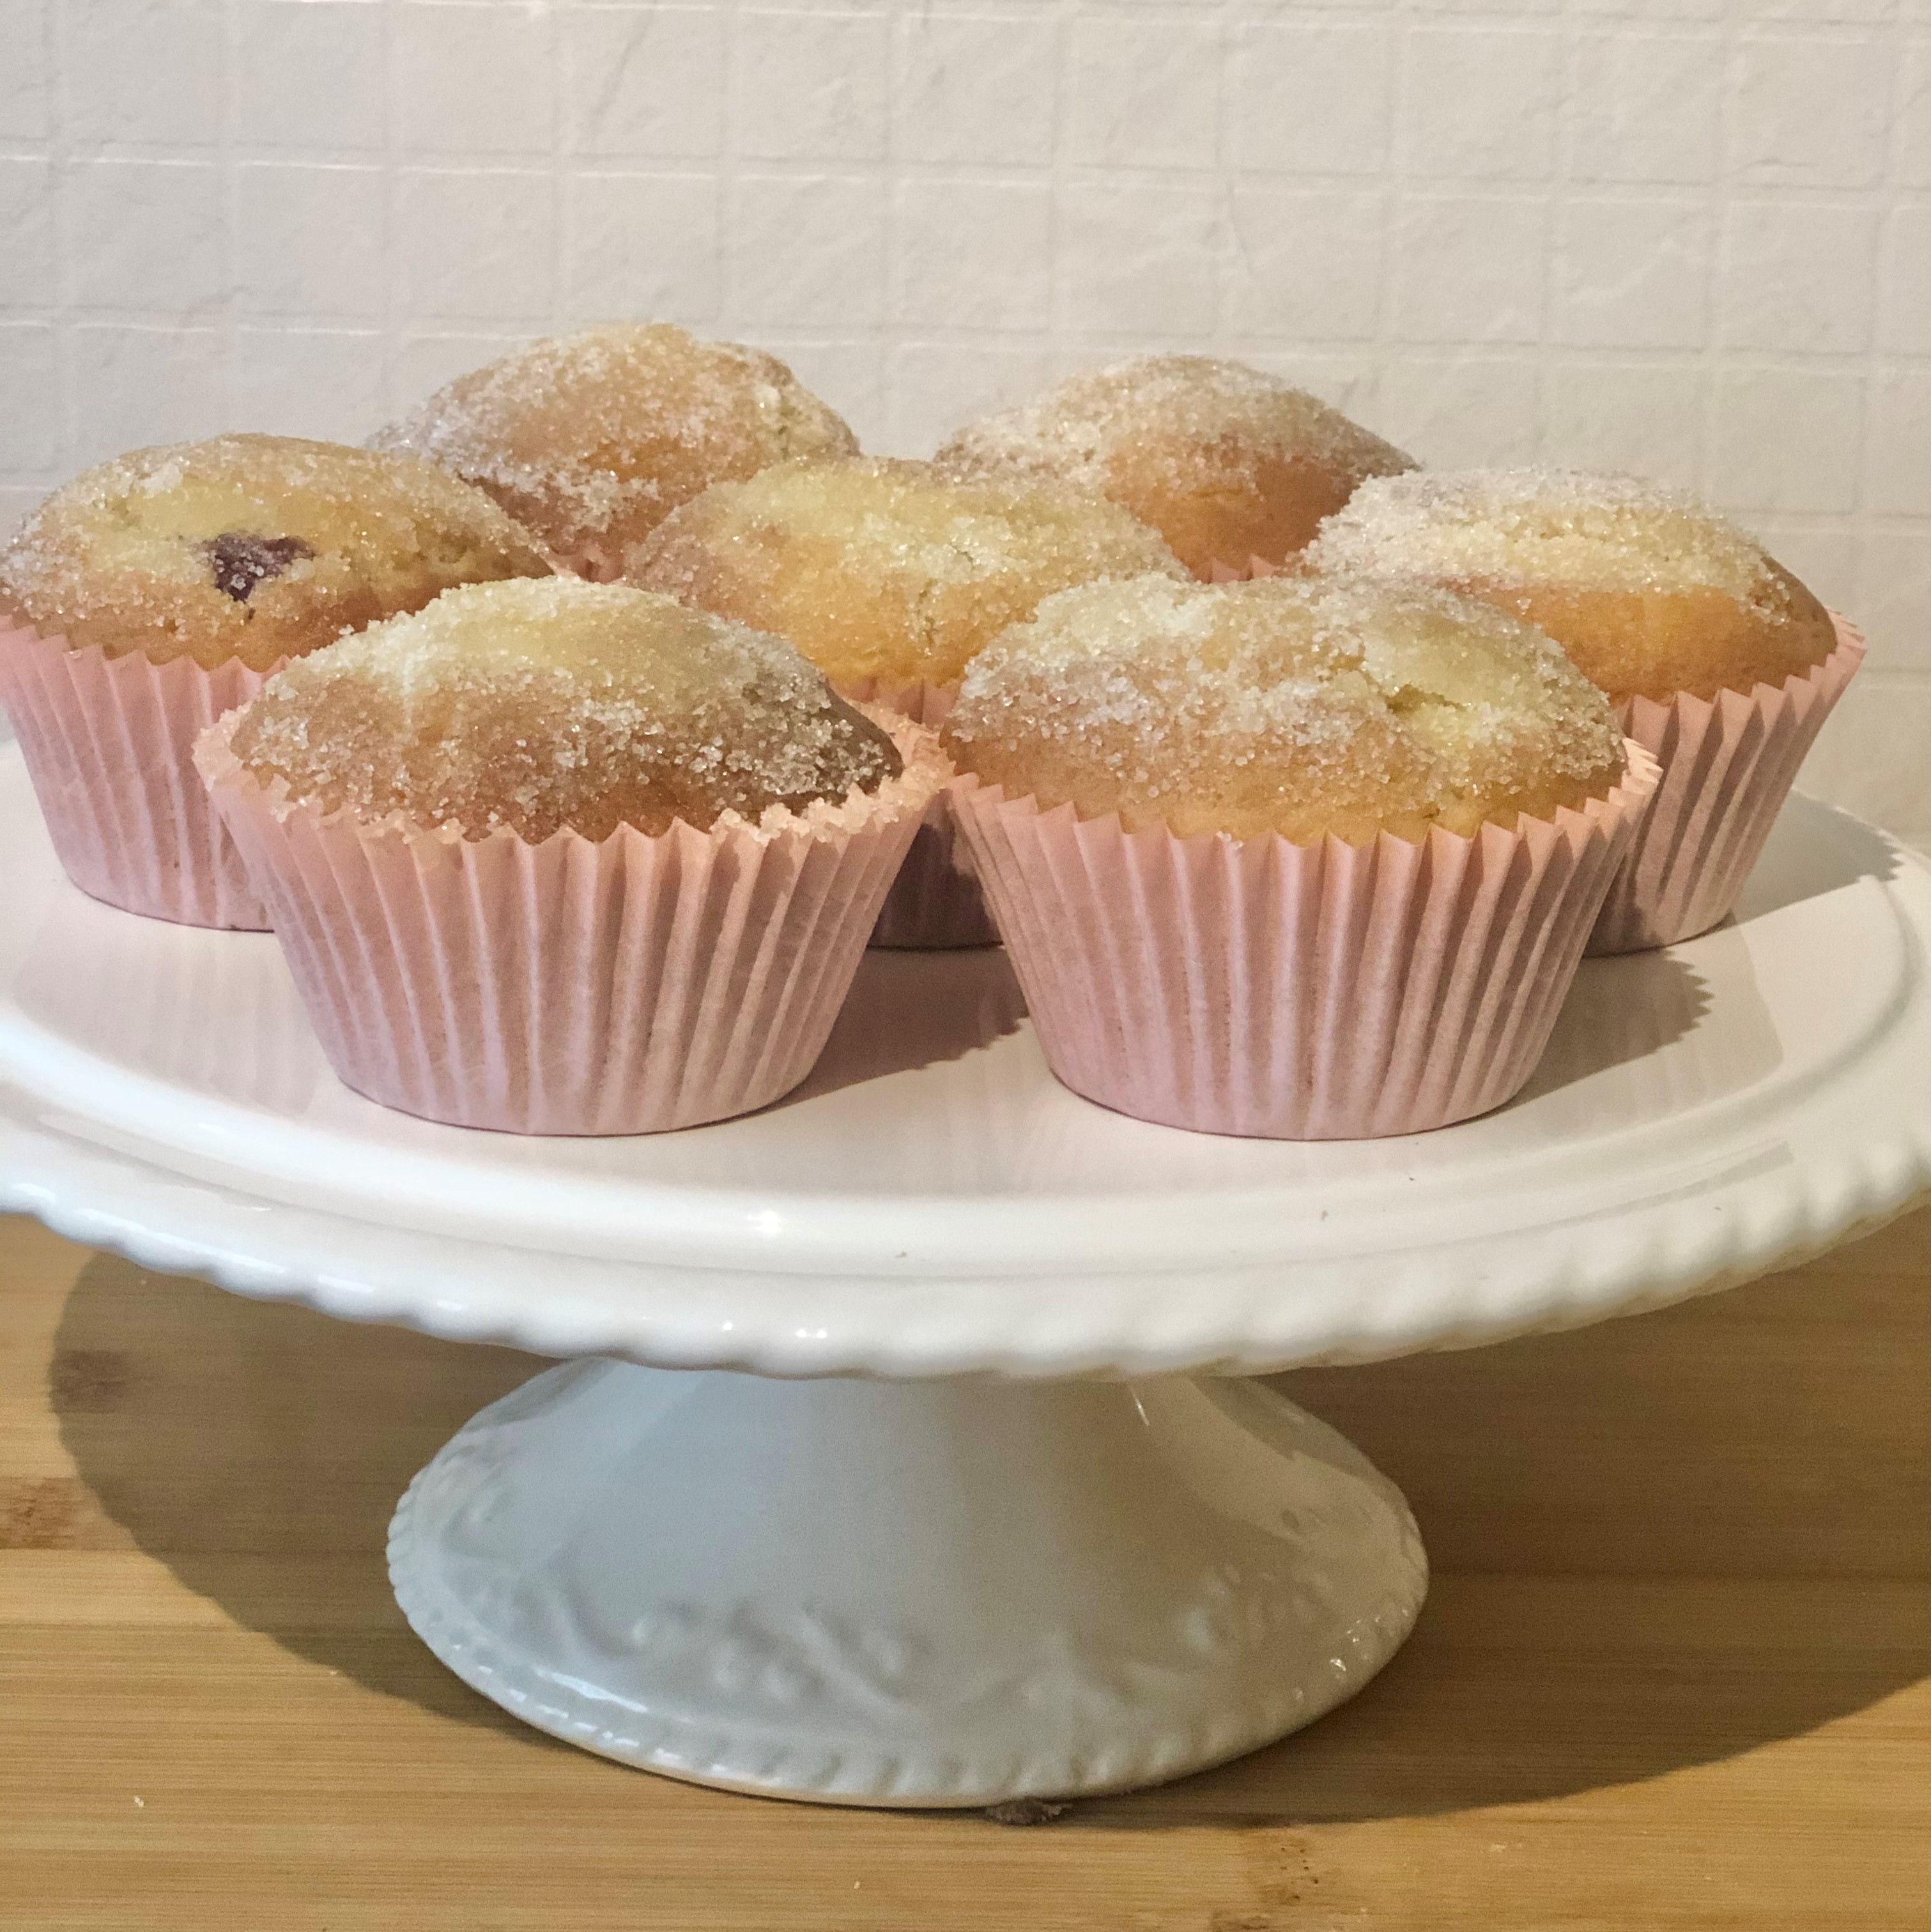 Duffins - Another family favourite